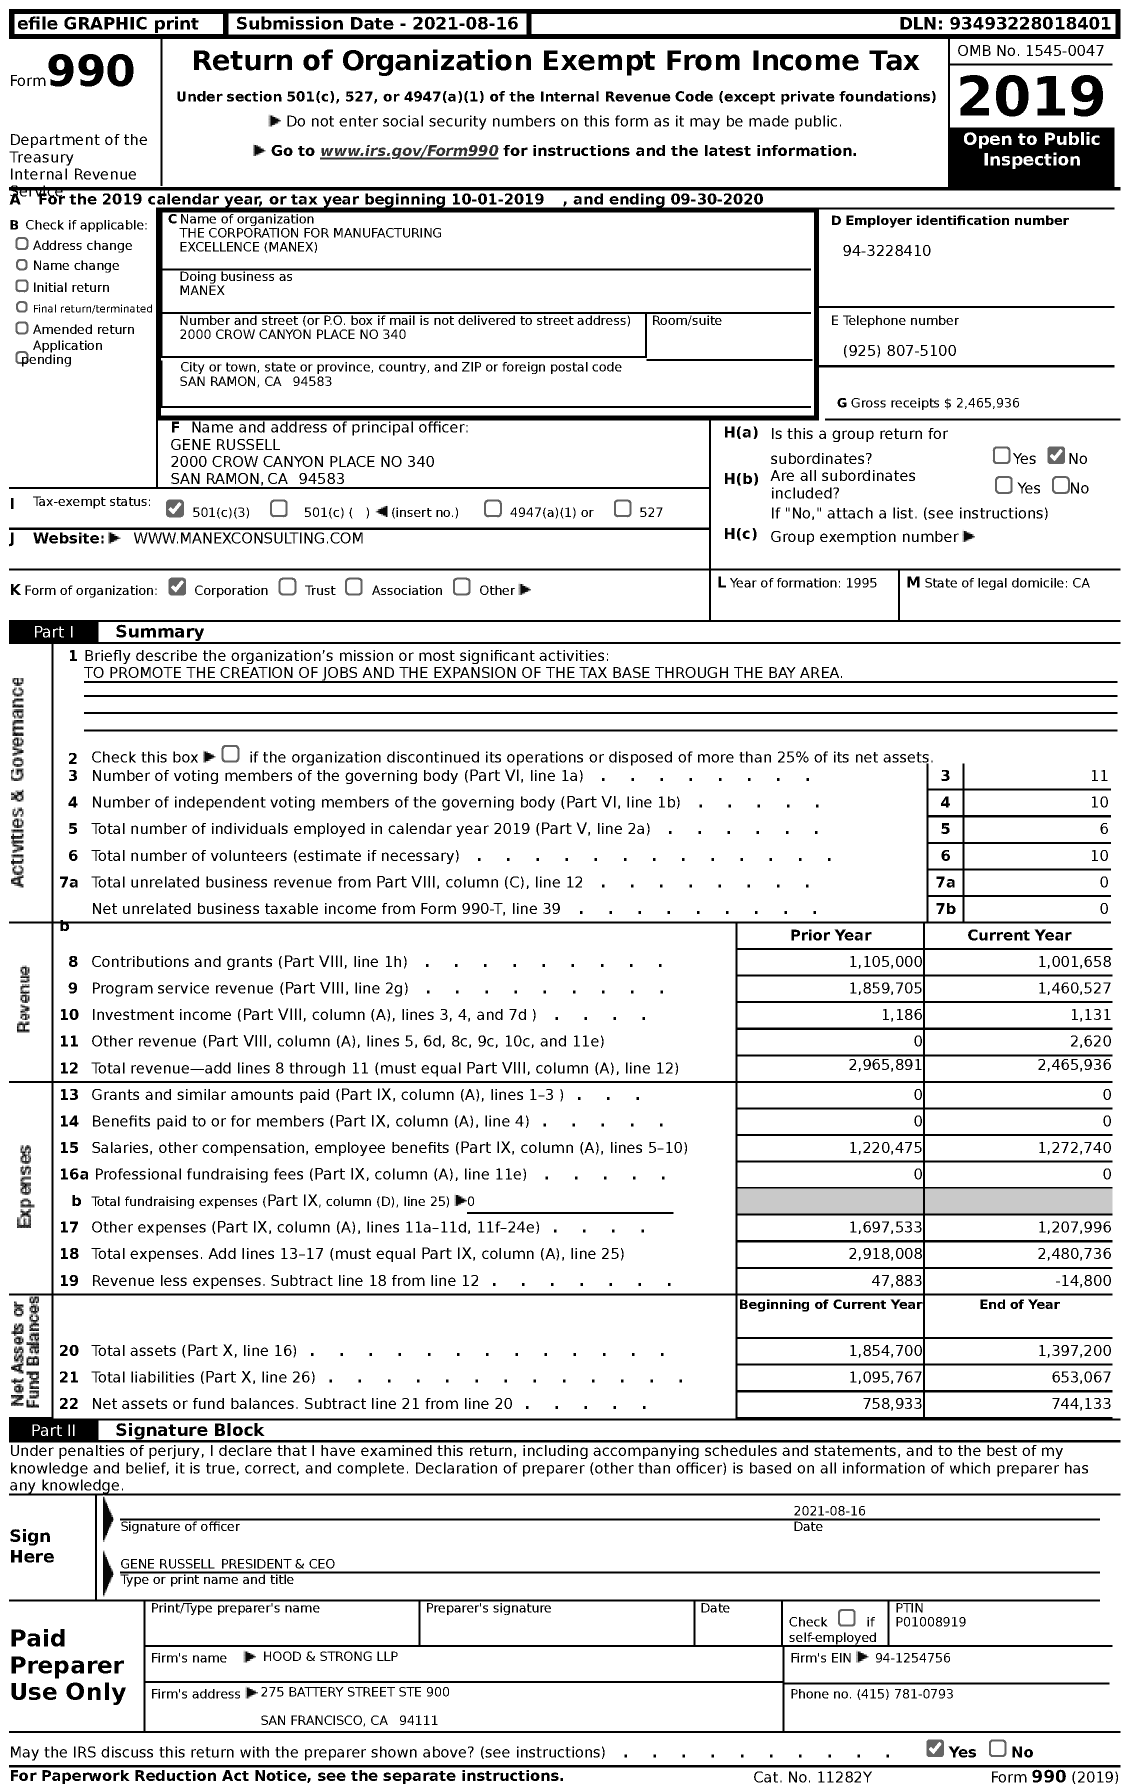 Image of first page of 2019 Form 990 for The Corporation for Manufacturing Excellence Manex (Manex)